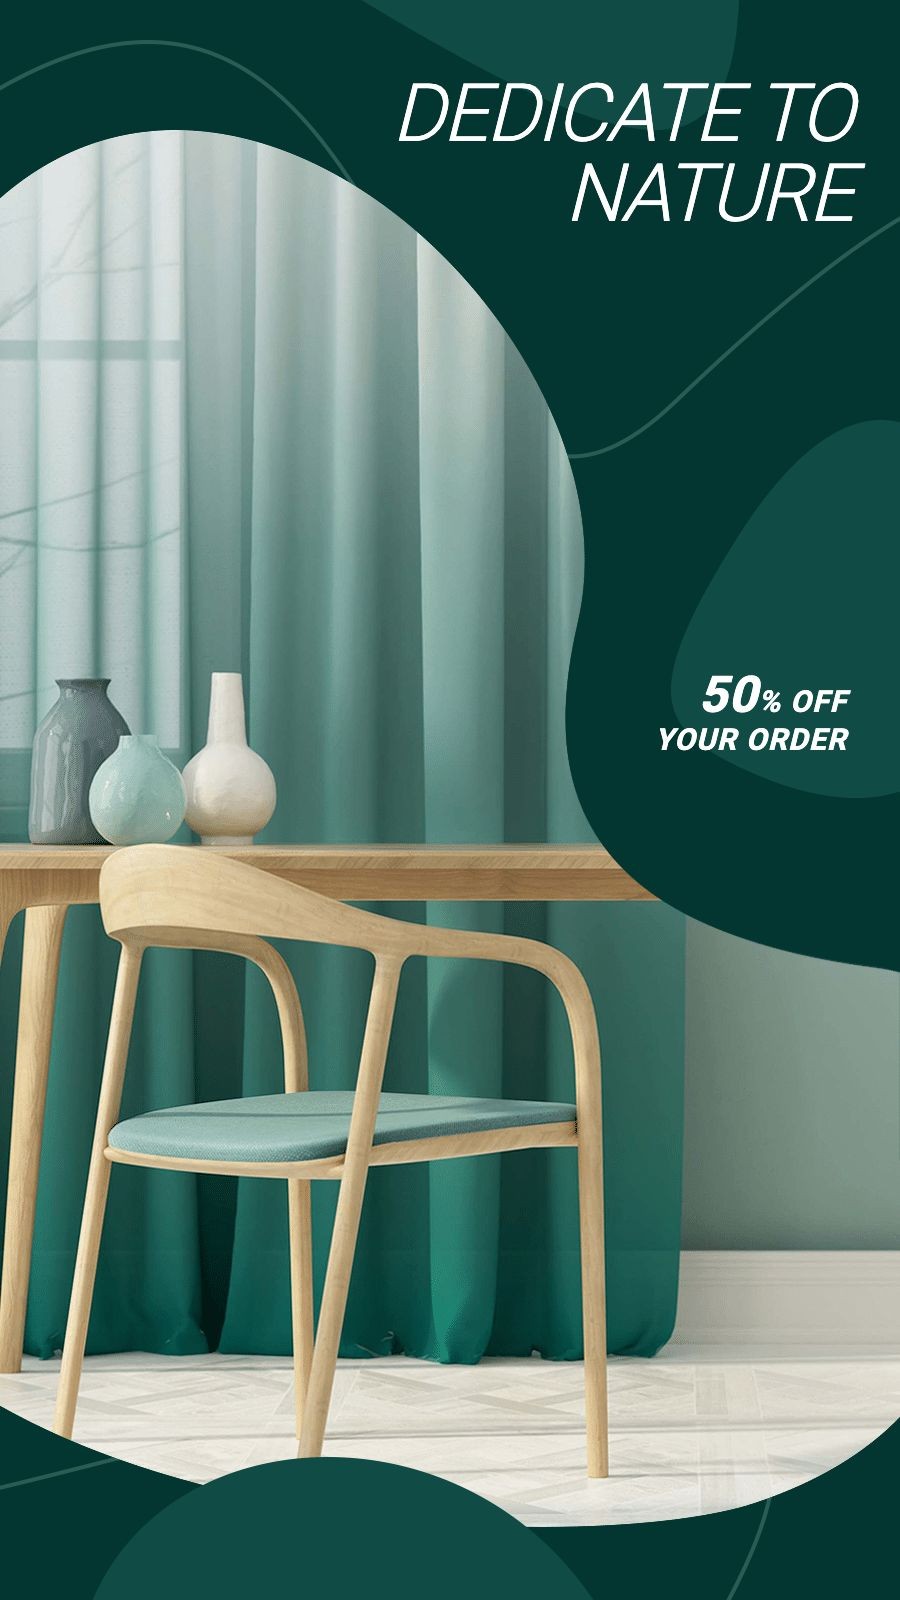 Green Linear Geometry Design Home Furniture Discount Sale Promotion Ecommerce Story预览效果